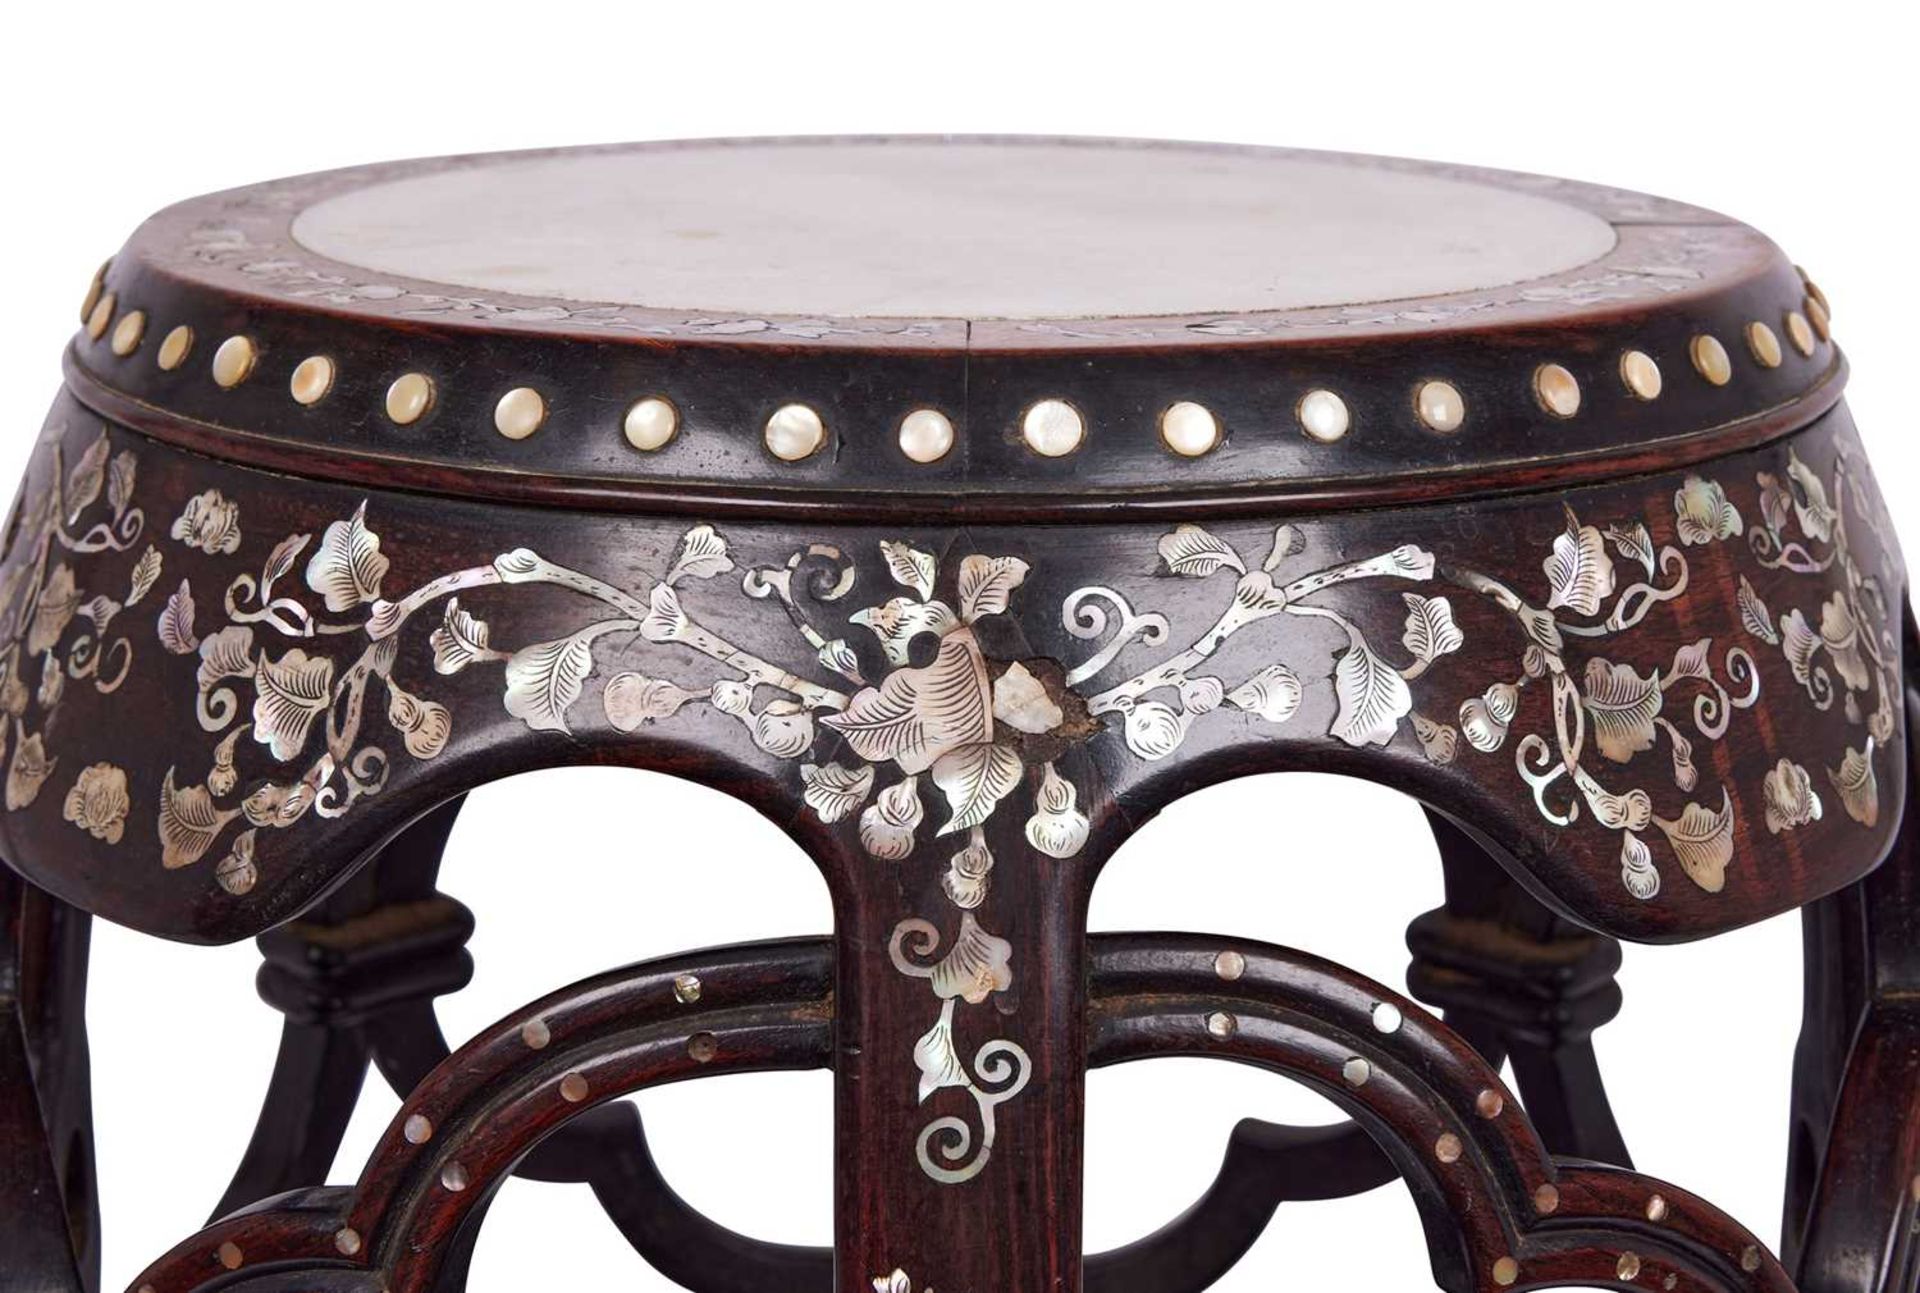 A 19TH CENTURY CHINESE HARDWOOD AND MOTHER OF PEARL GARDEN SEAT - Image 2 of 3